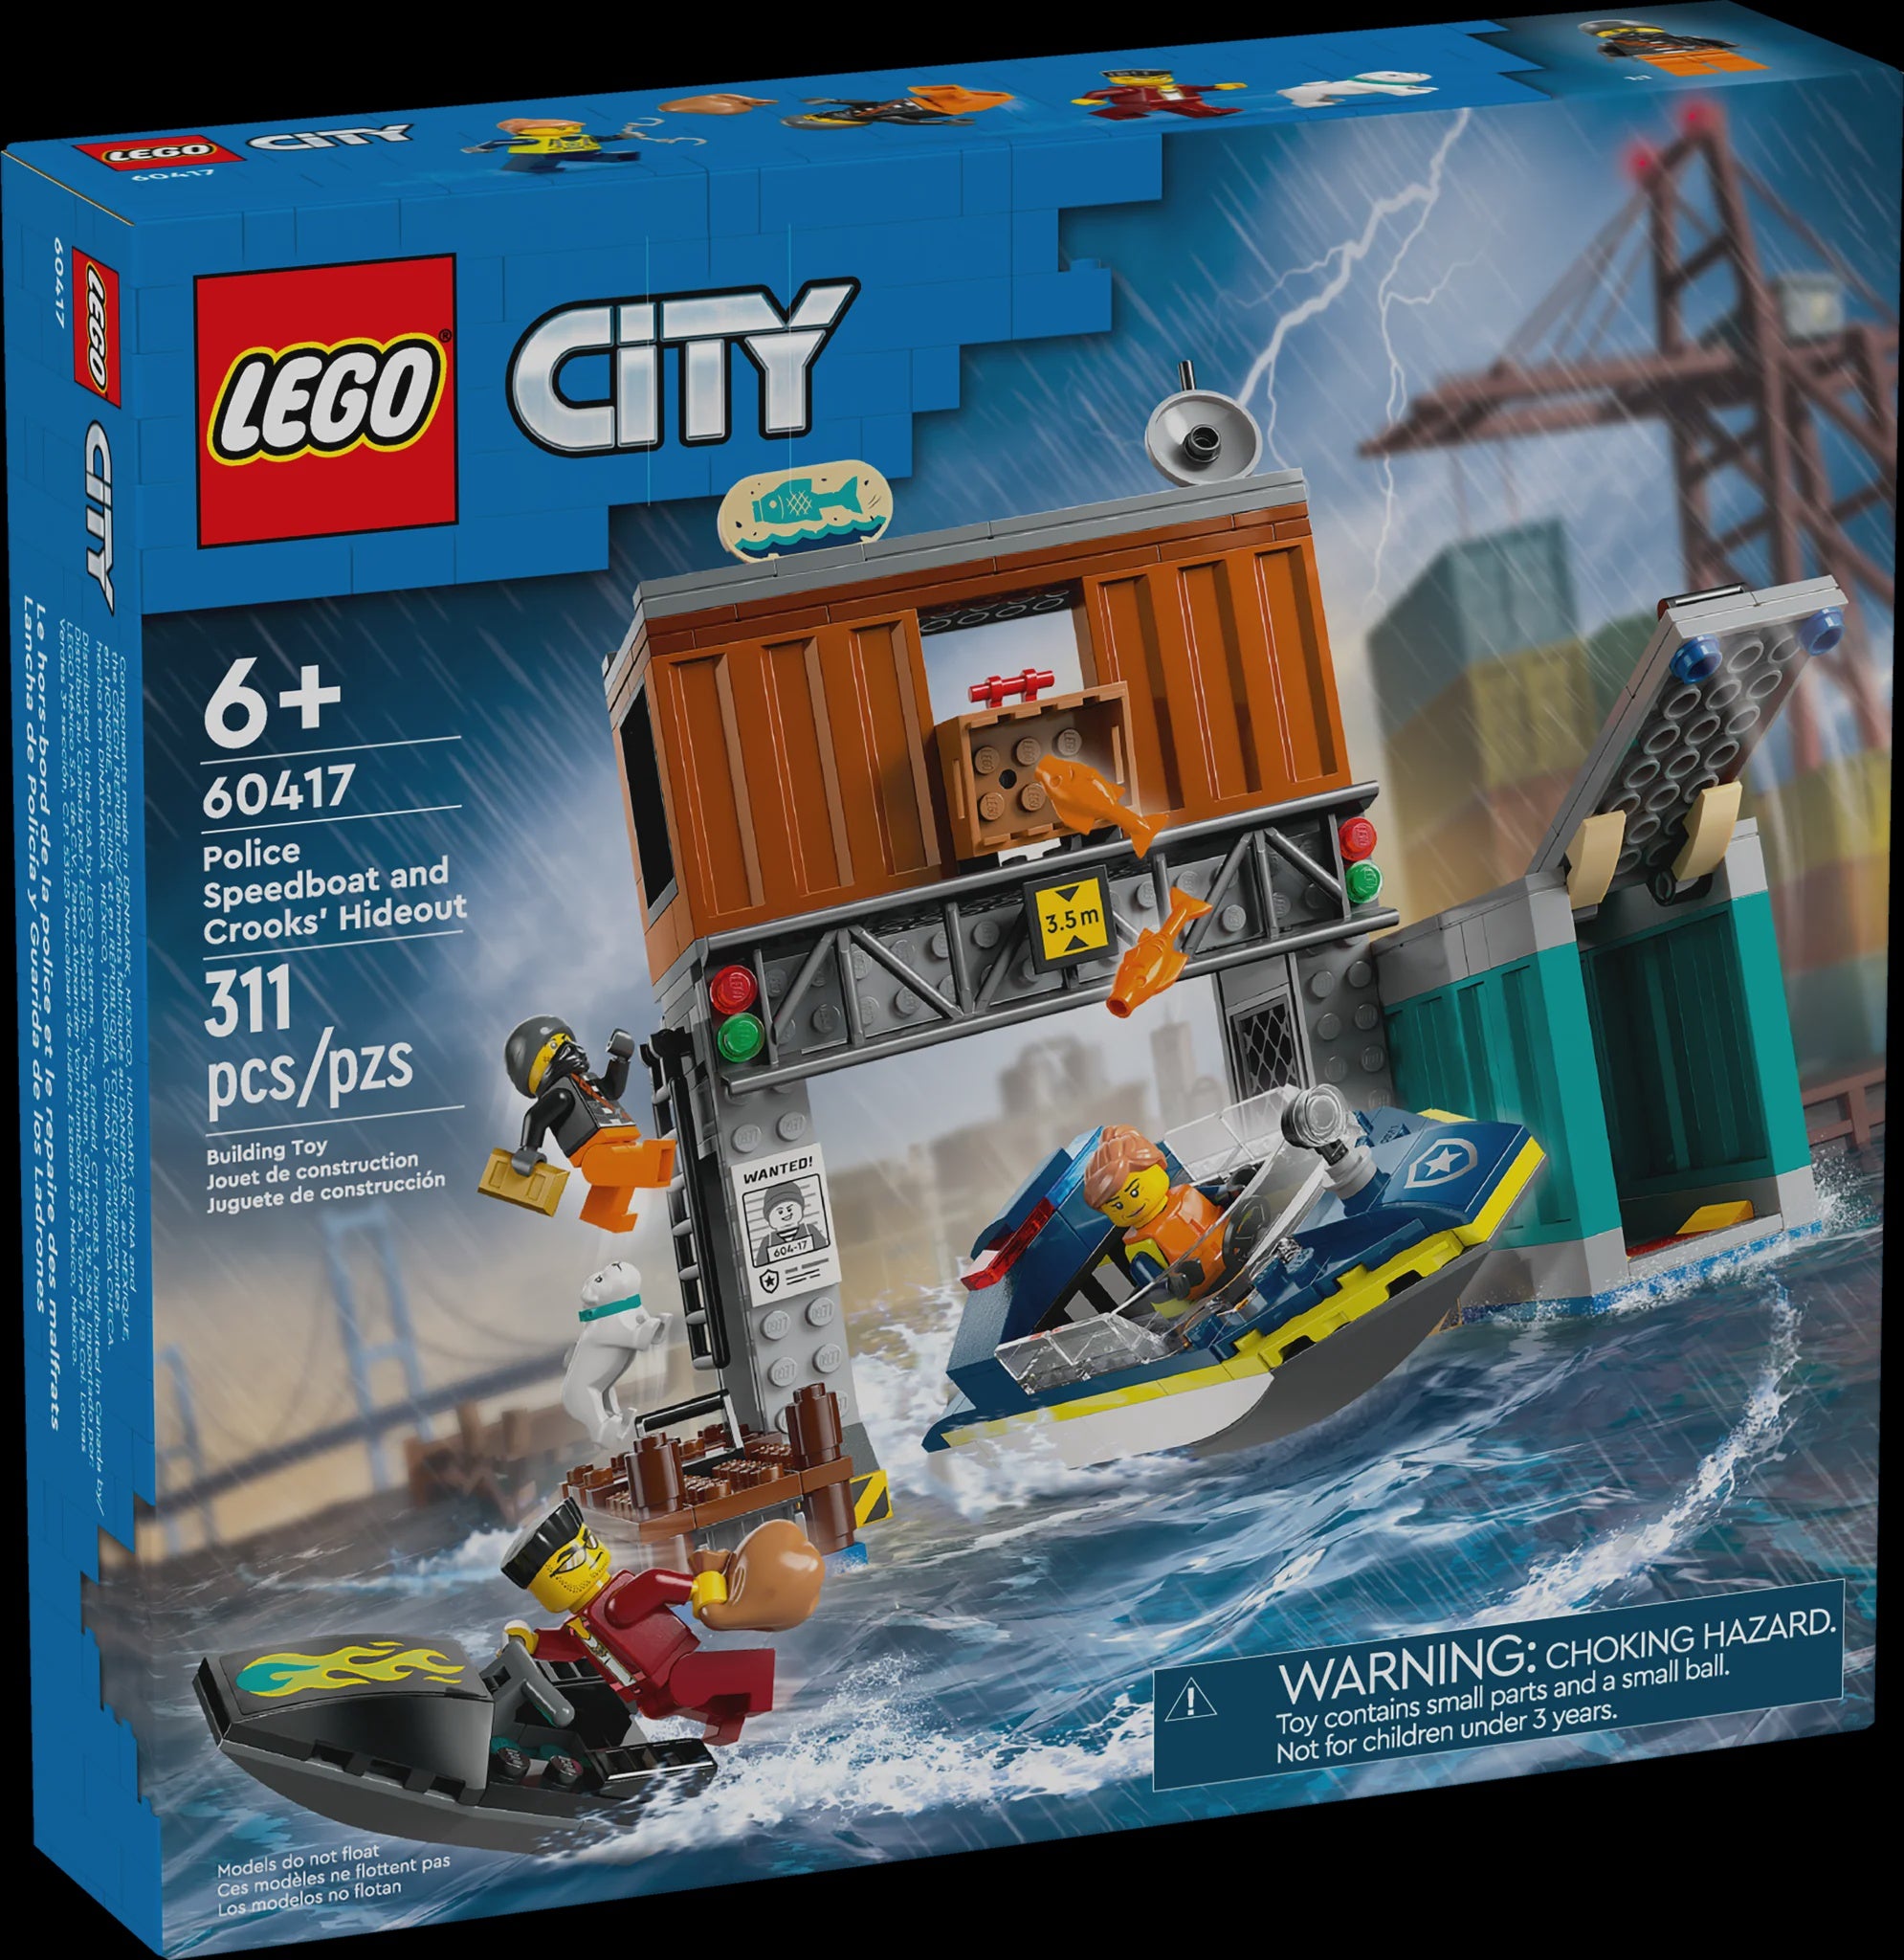 Lego City: Police Speedboat and Crooks' Hideout 60417